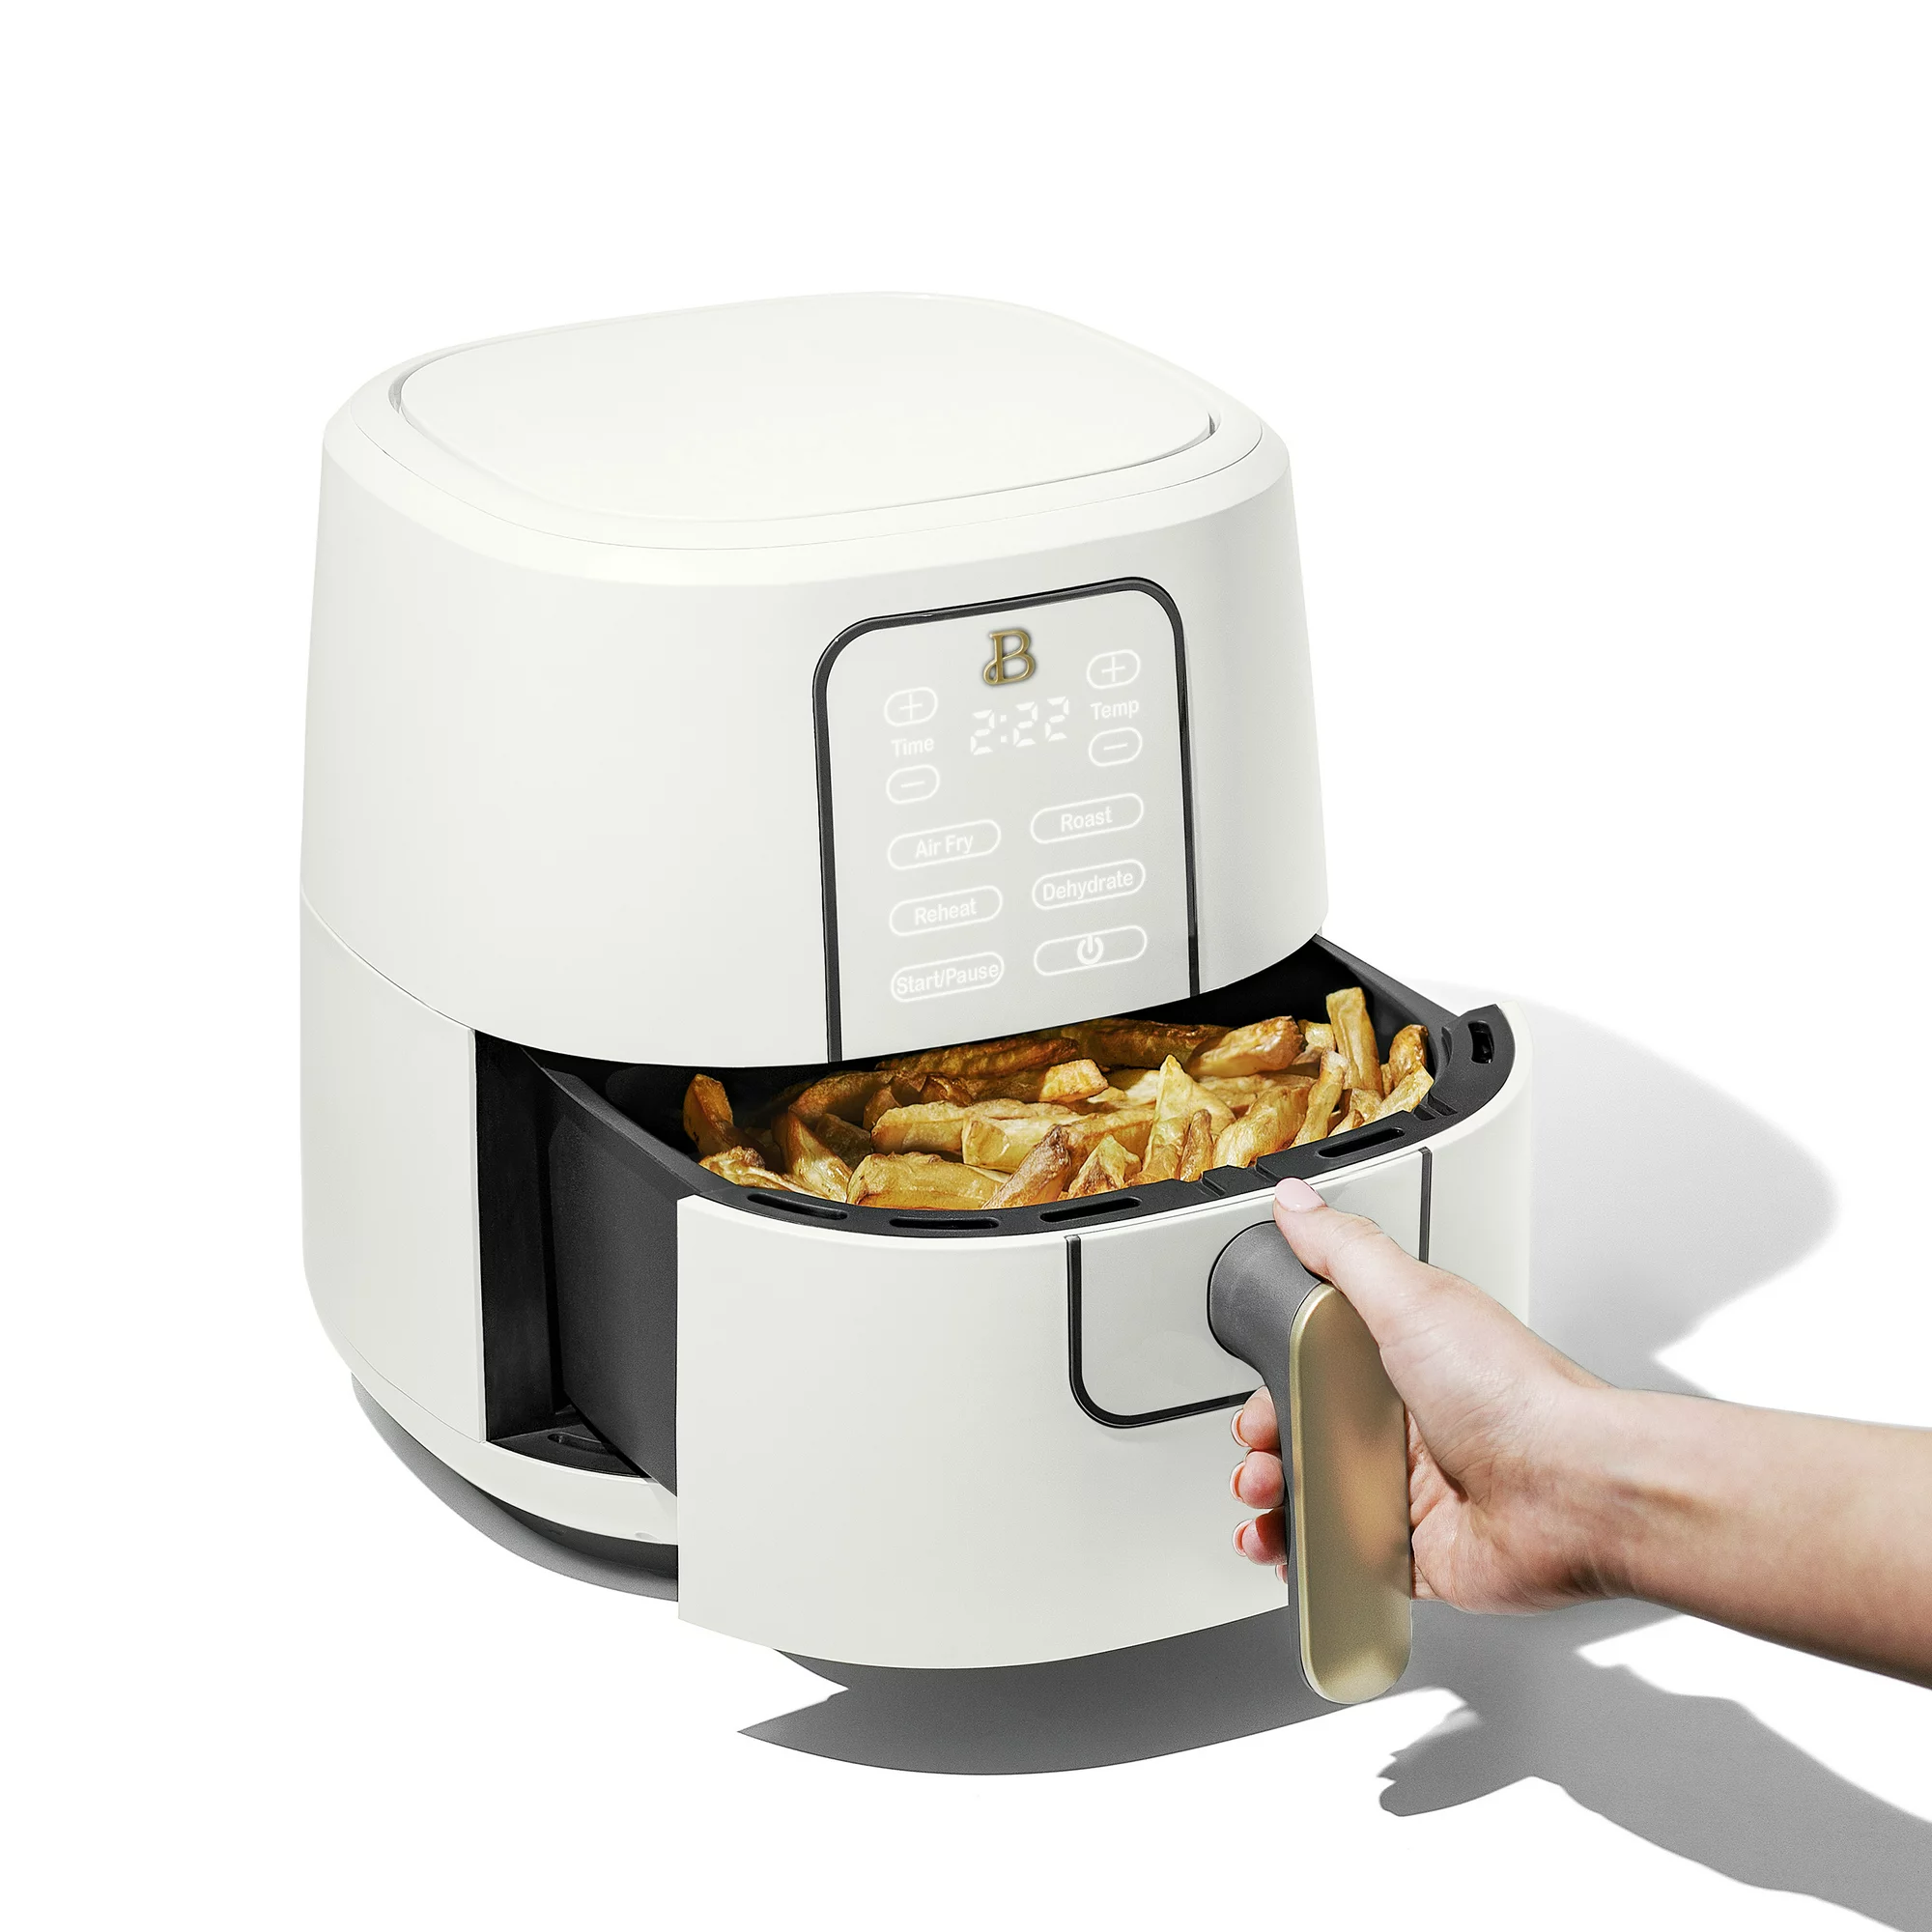 https://discounttoday.net/wp-content/uploads/2023/01/Beautiful-6-Quart-Touchscreen-Air-Fryer-White-Icing-by-Drew-Barrymore-4.webp